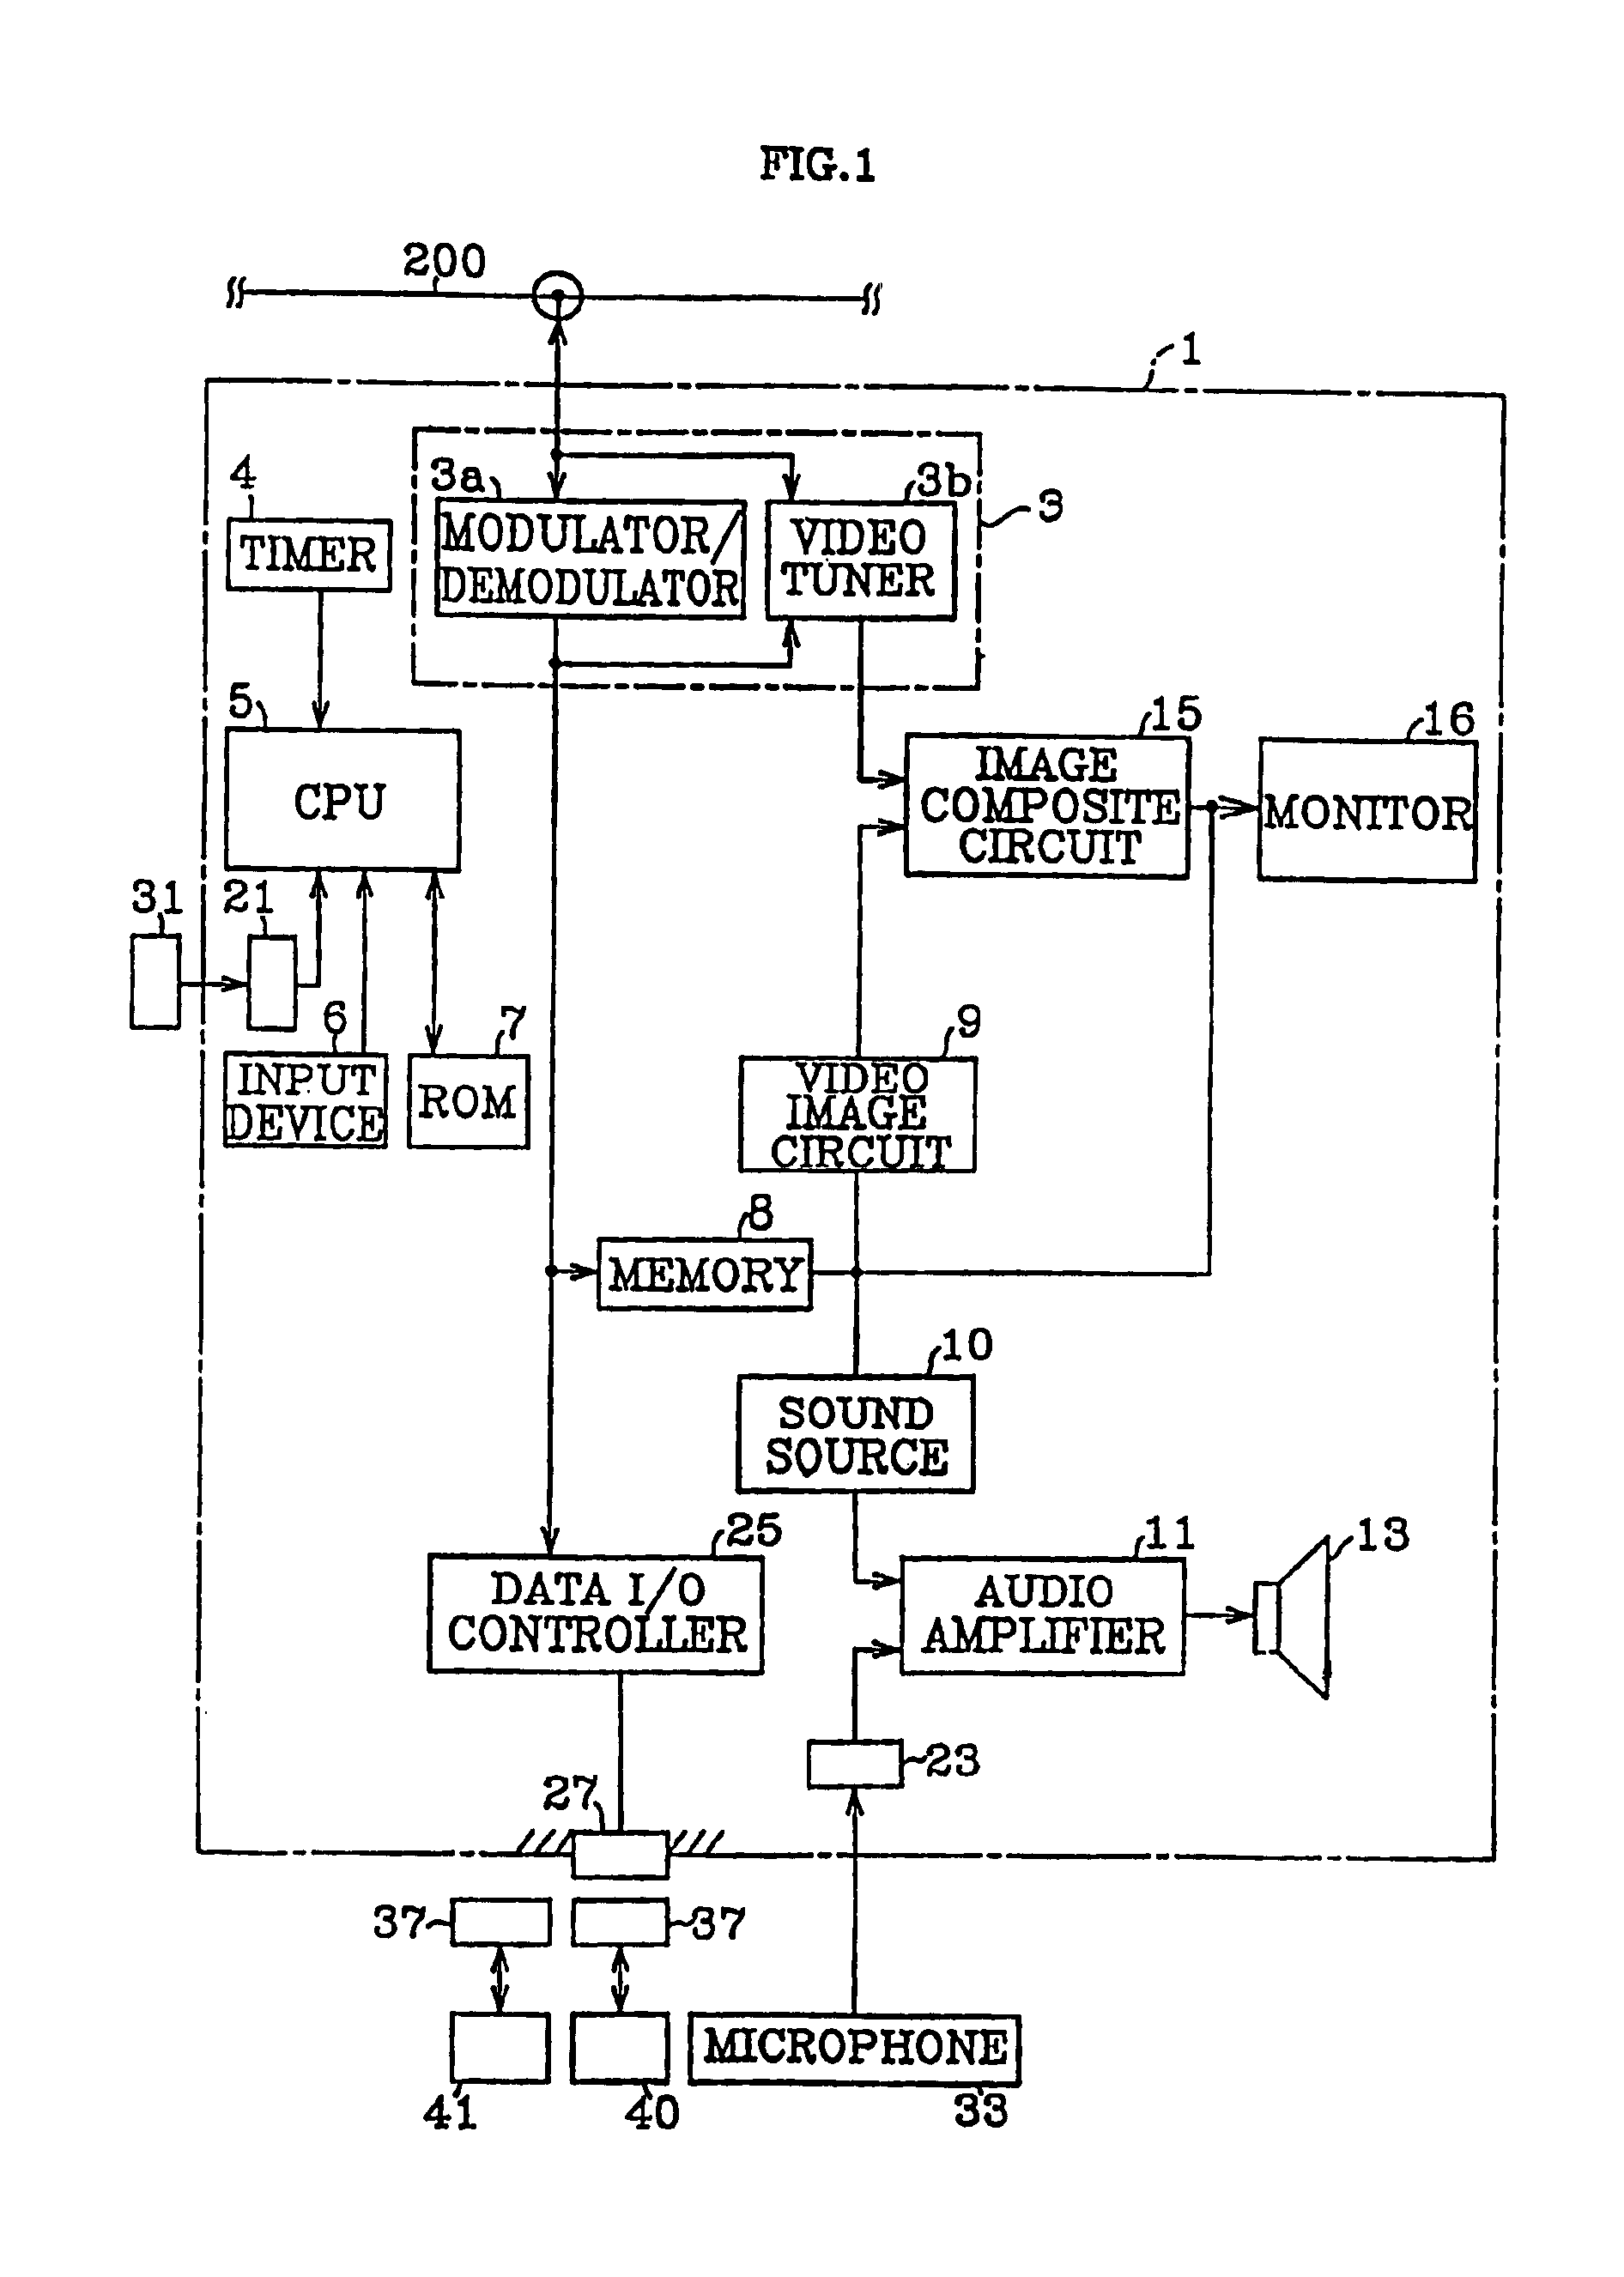 Interactive communication system for communicating video game and karaoke software